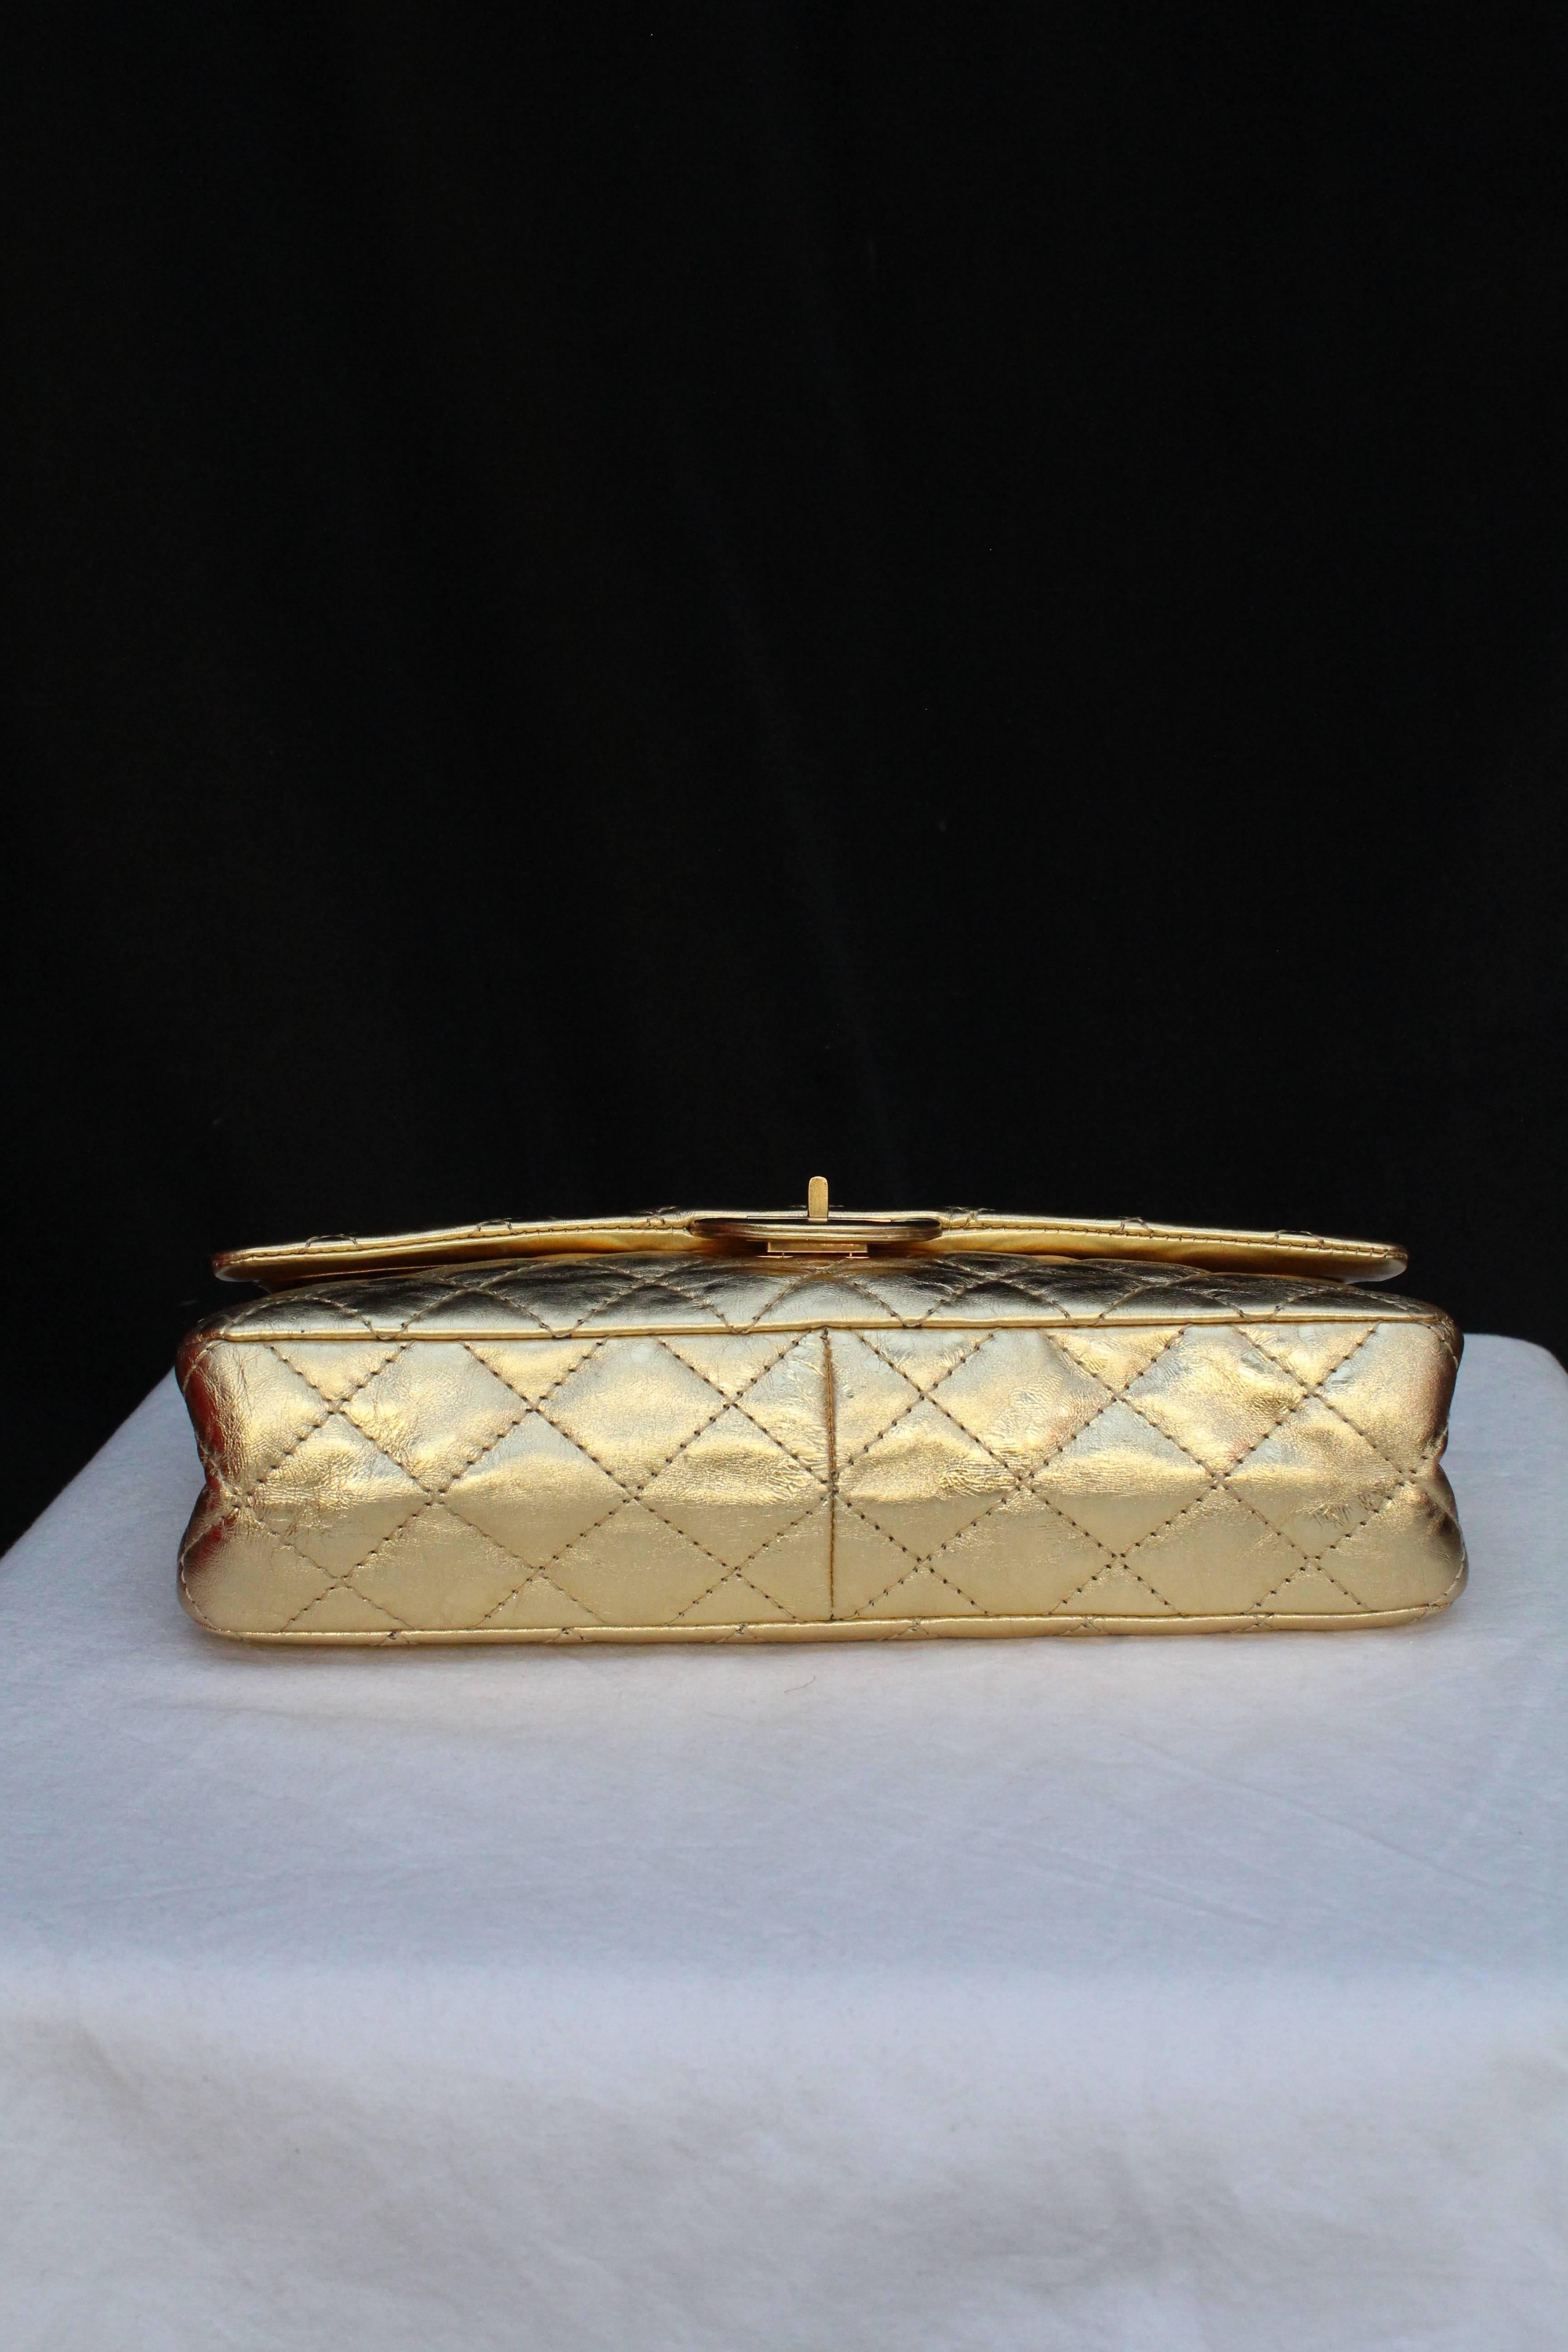 Chanel quilted golden leather bag, 2.55 Model, limited edition 1